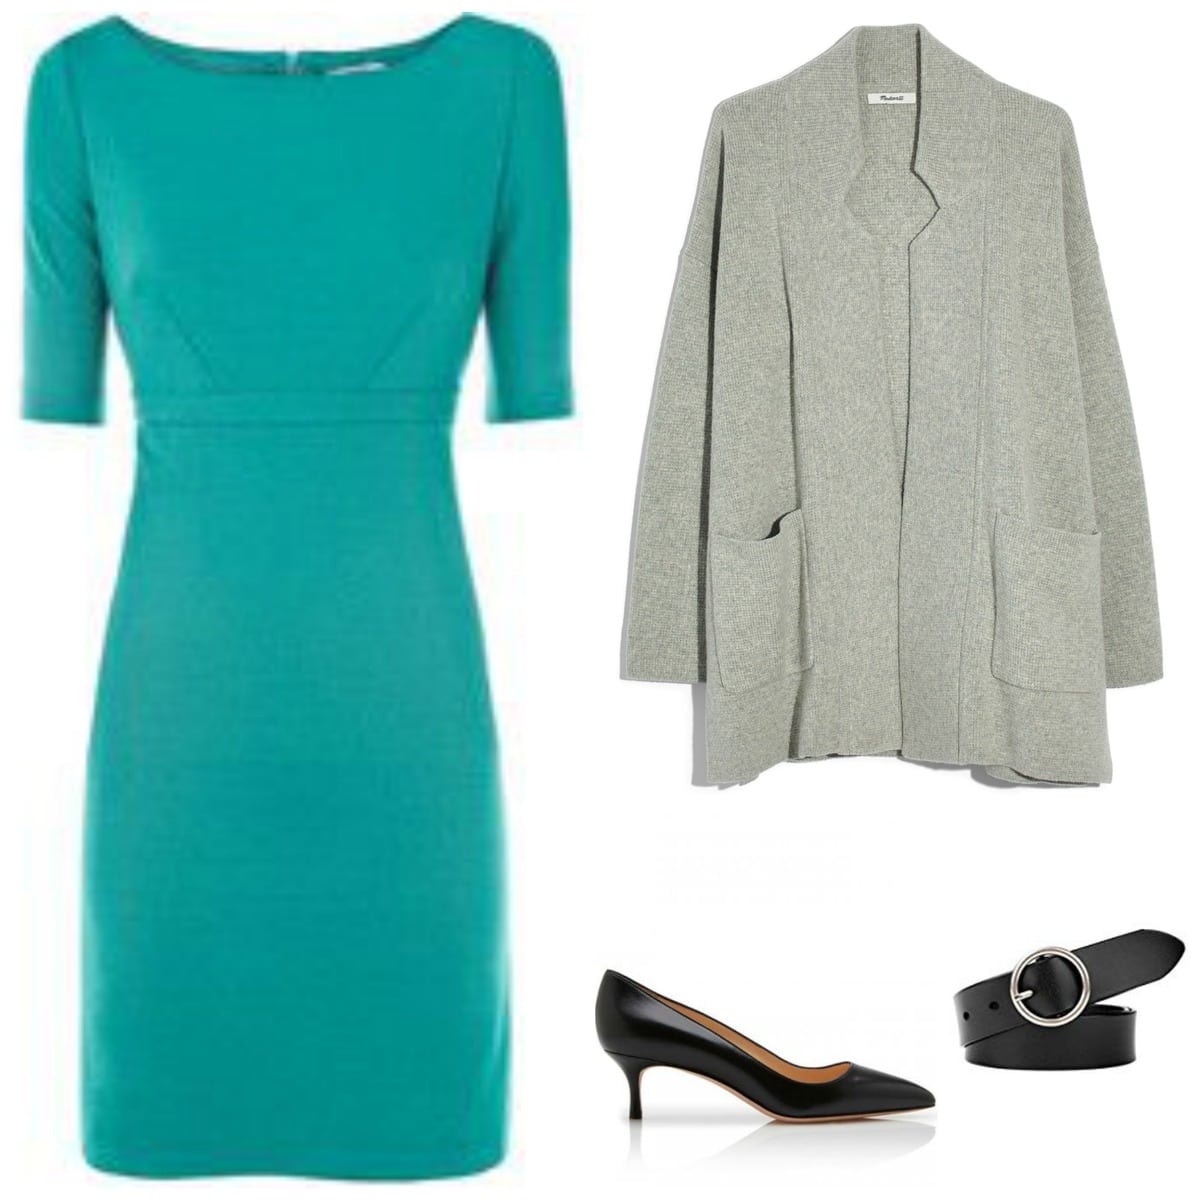 By belting the sweater coat over the dress, you create a completely different look.